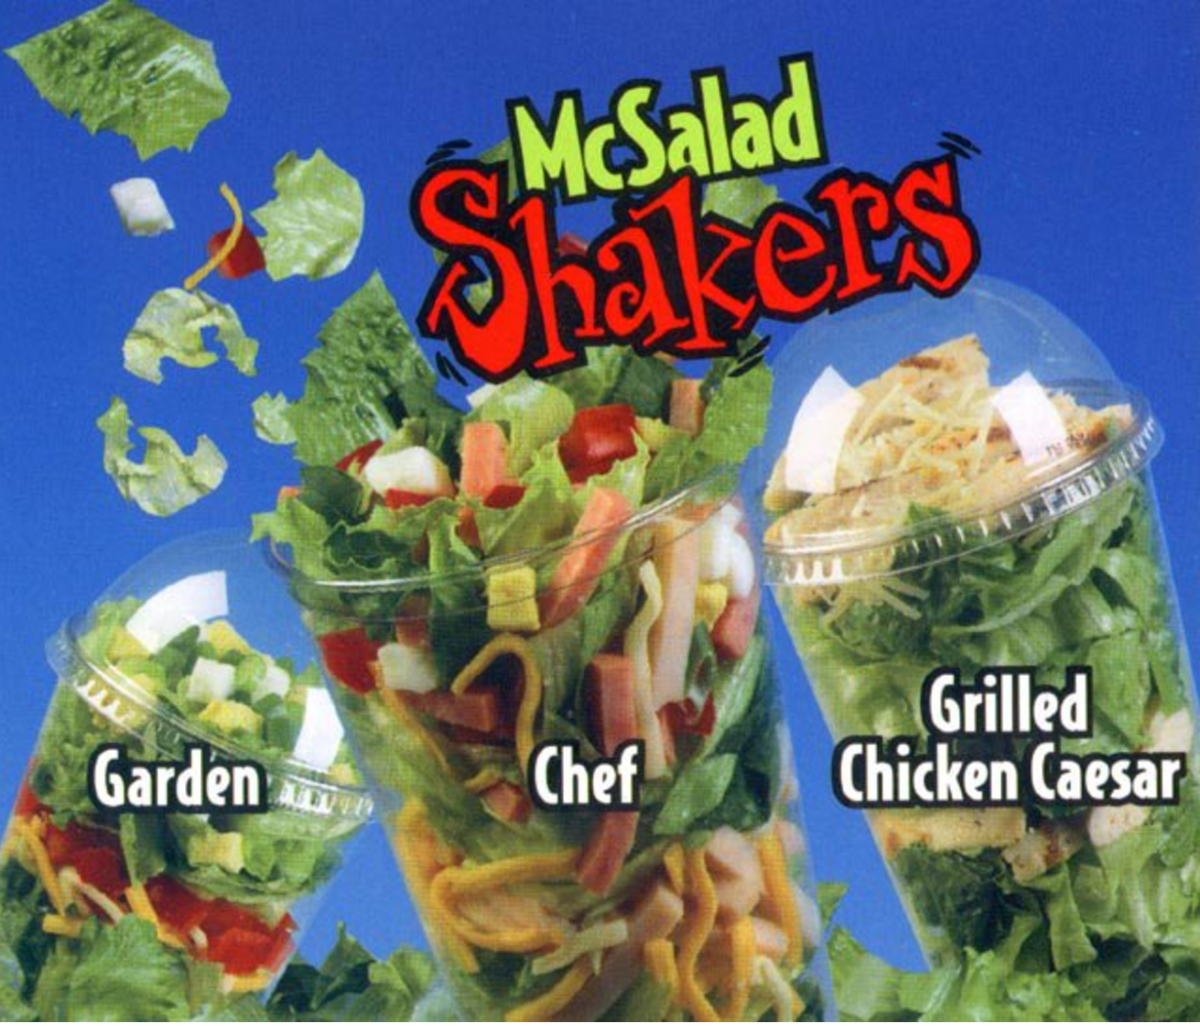 24 fast food items you’ll never see again